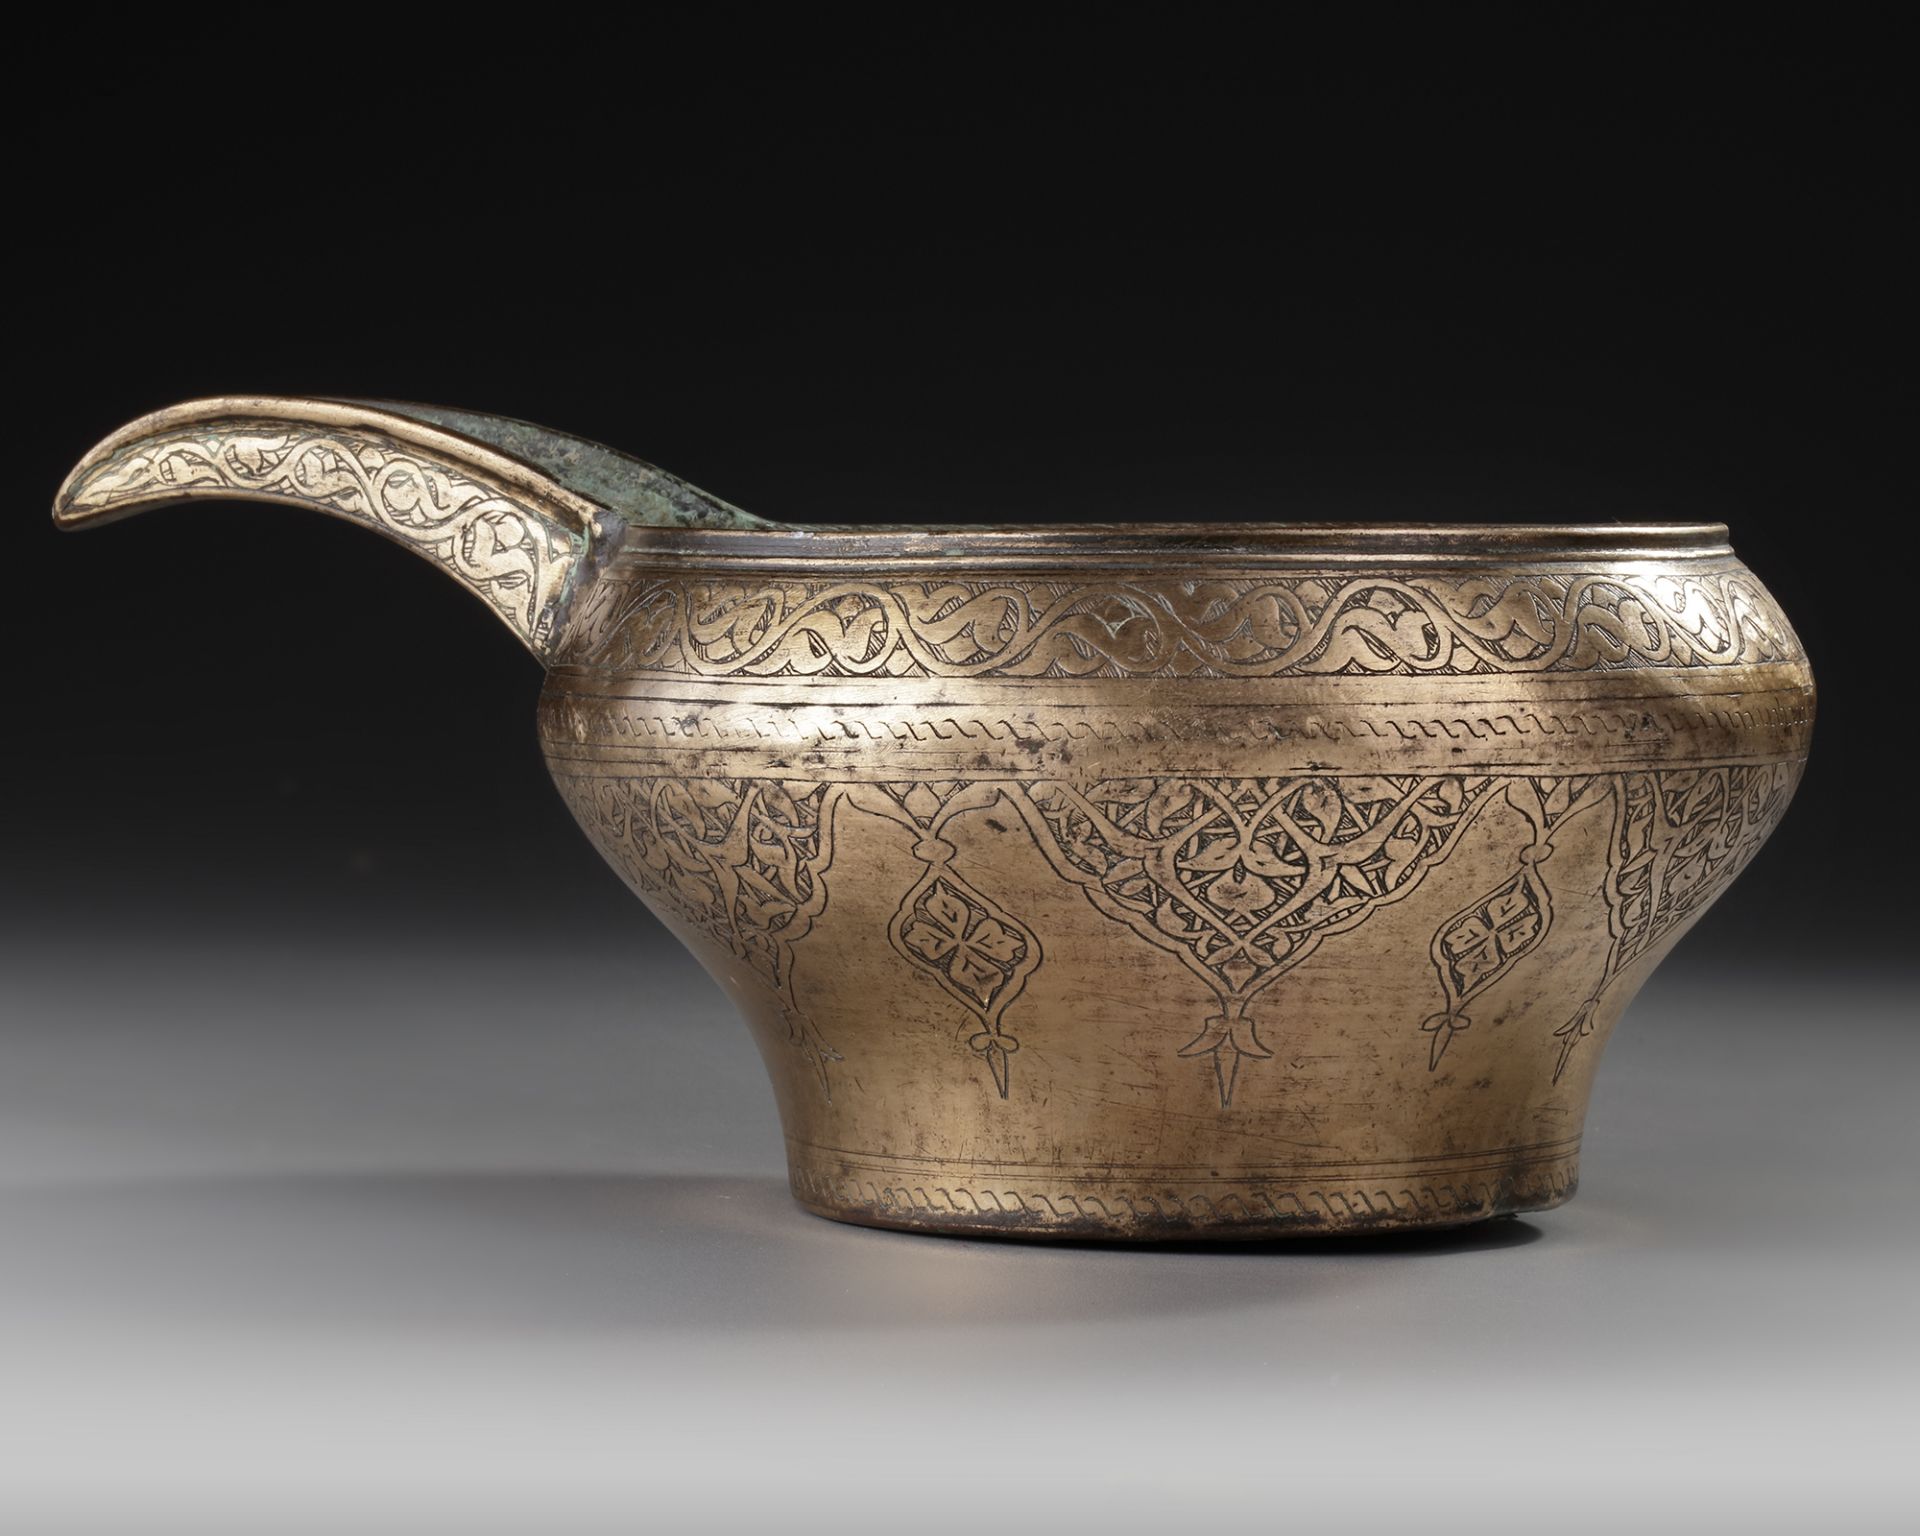 AN ENGRAVED SAFAVID TINNED COPPER SPOUTED POURING BOWL, PERSIA, 17TH CENTURY